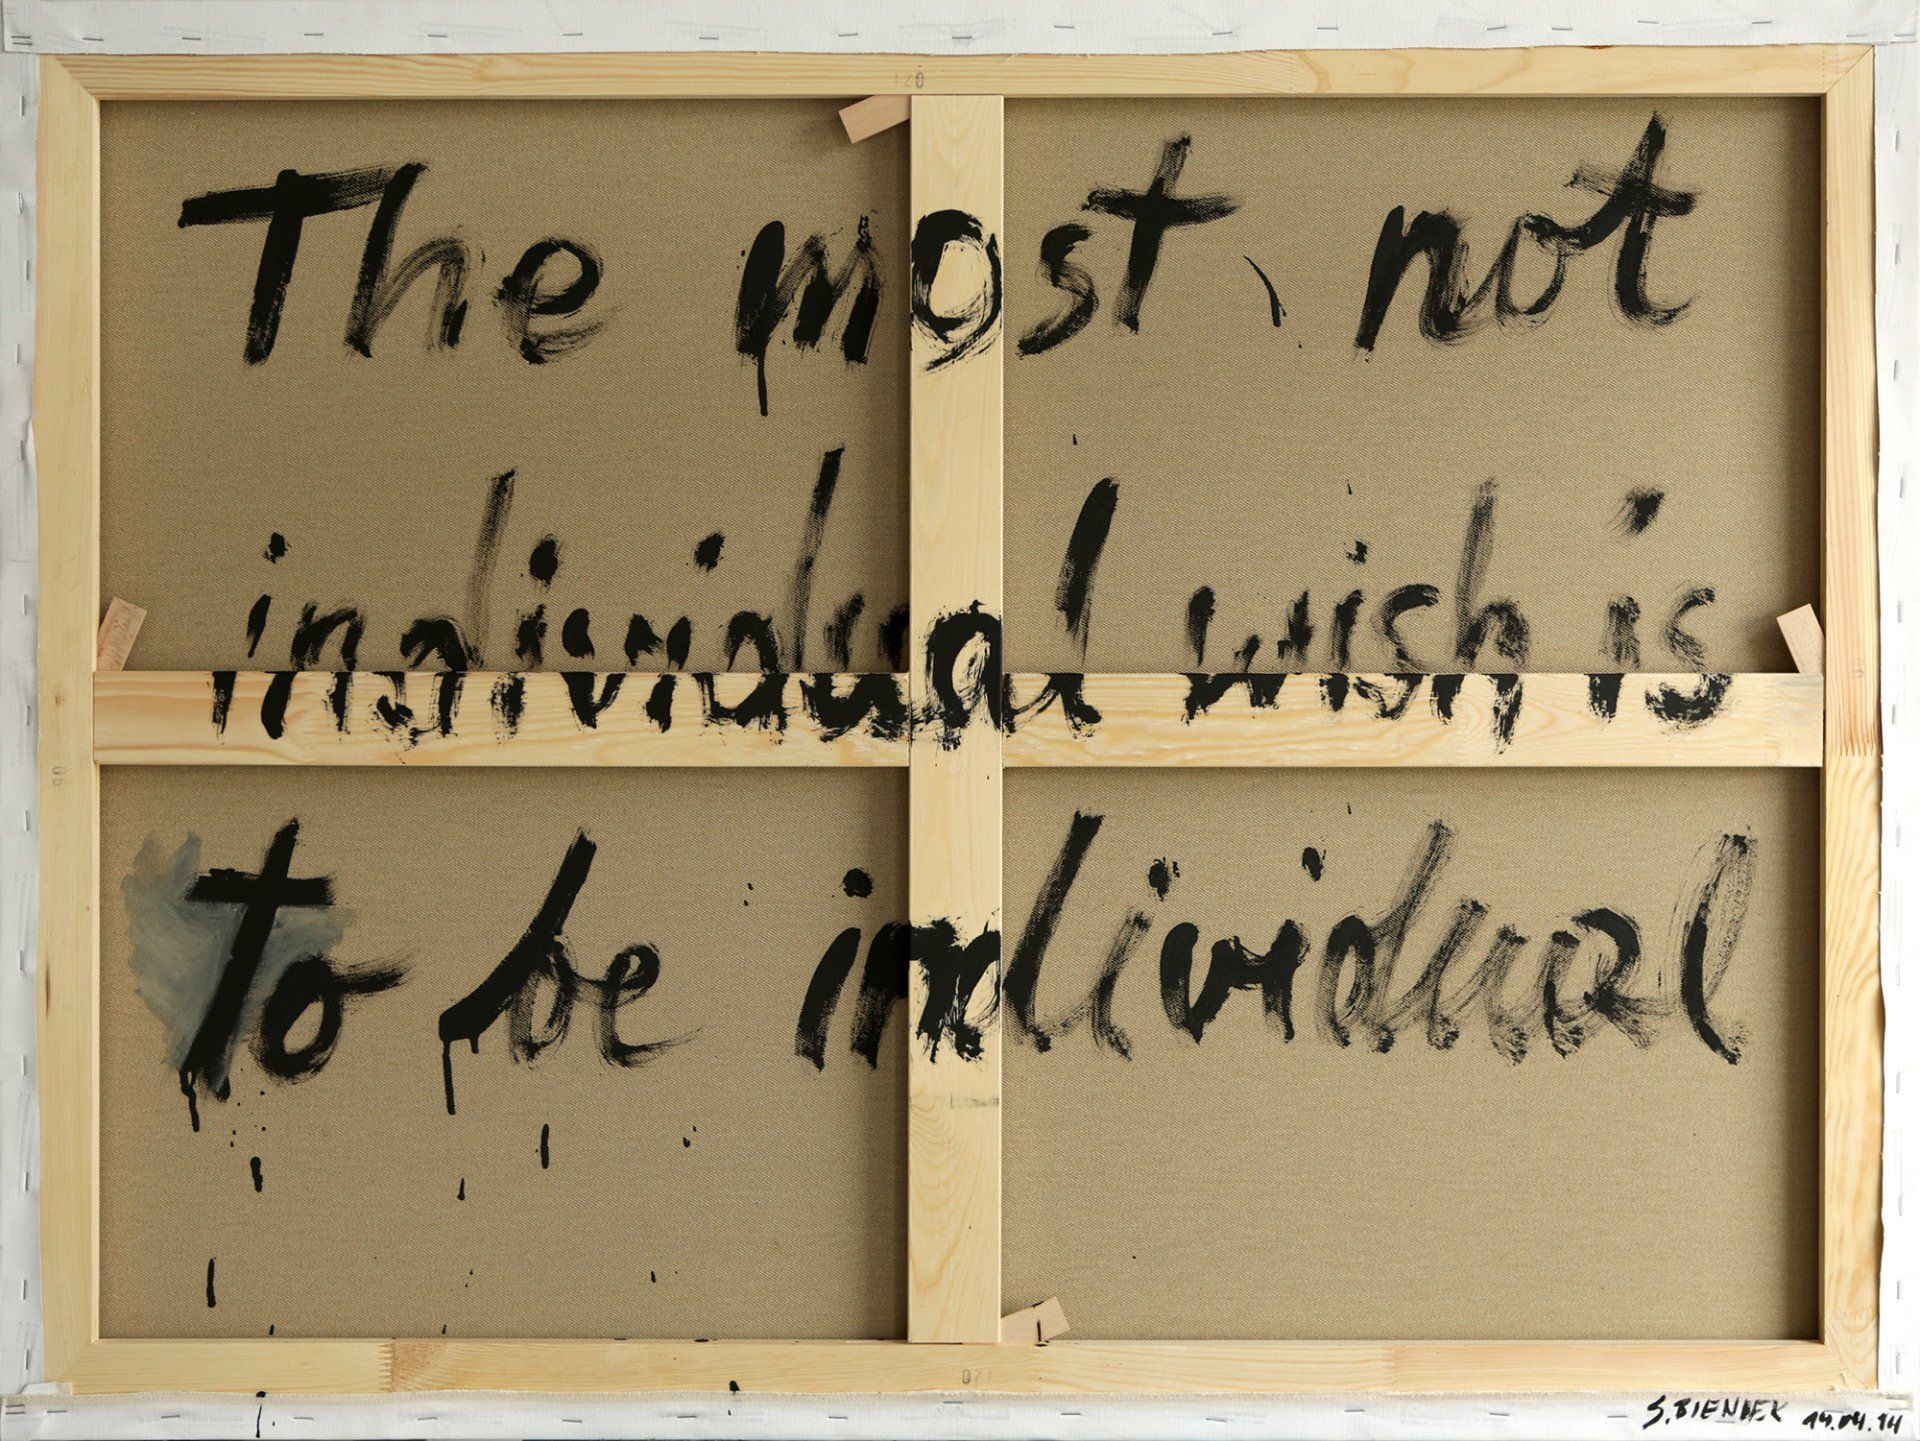 „The most not individual wish is to be individual“ by Sebastian Bieniek (B1EN1EK), 2014. Oil on back of canvas. 90 cm. x 120 cm. From the oeuvre of Bieniek-Text and part of the 